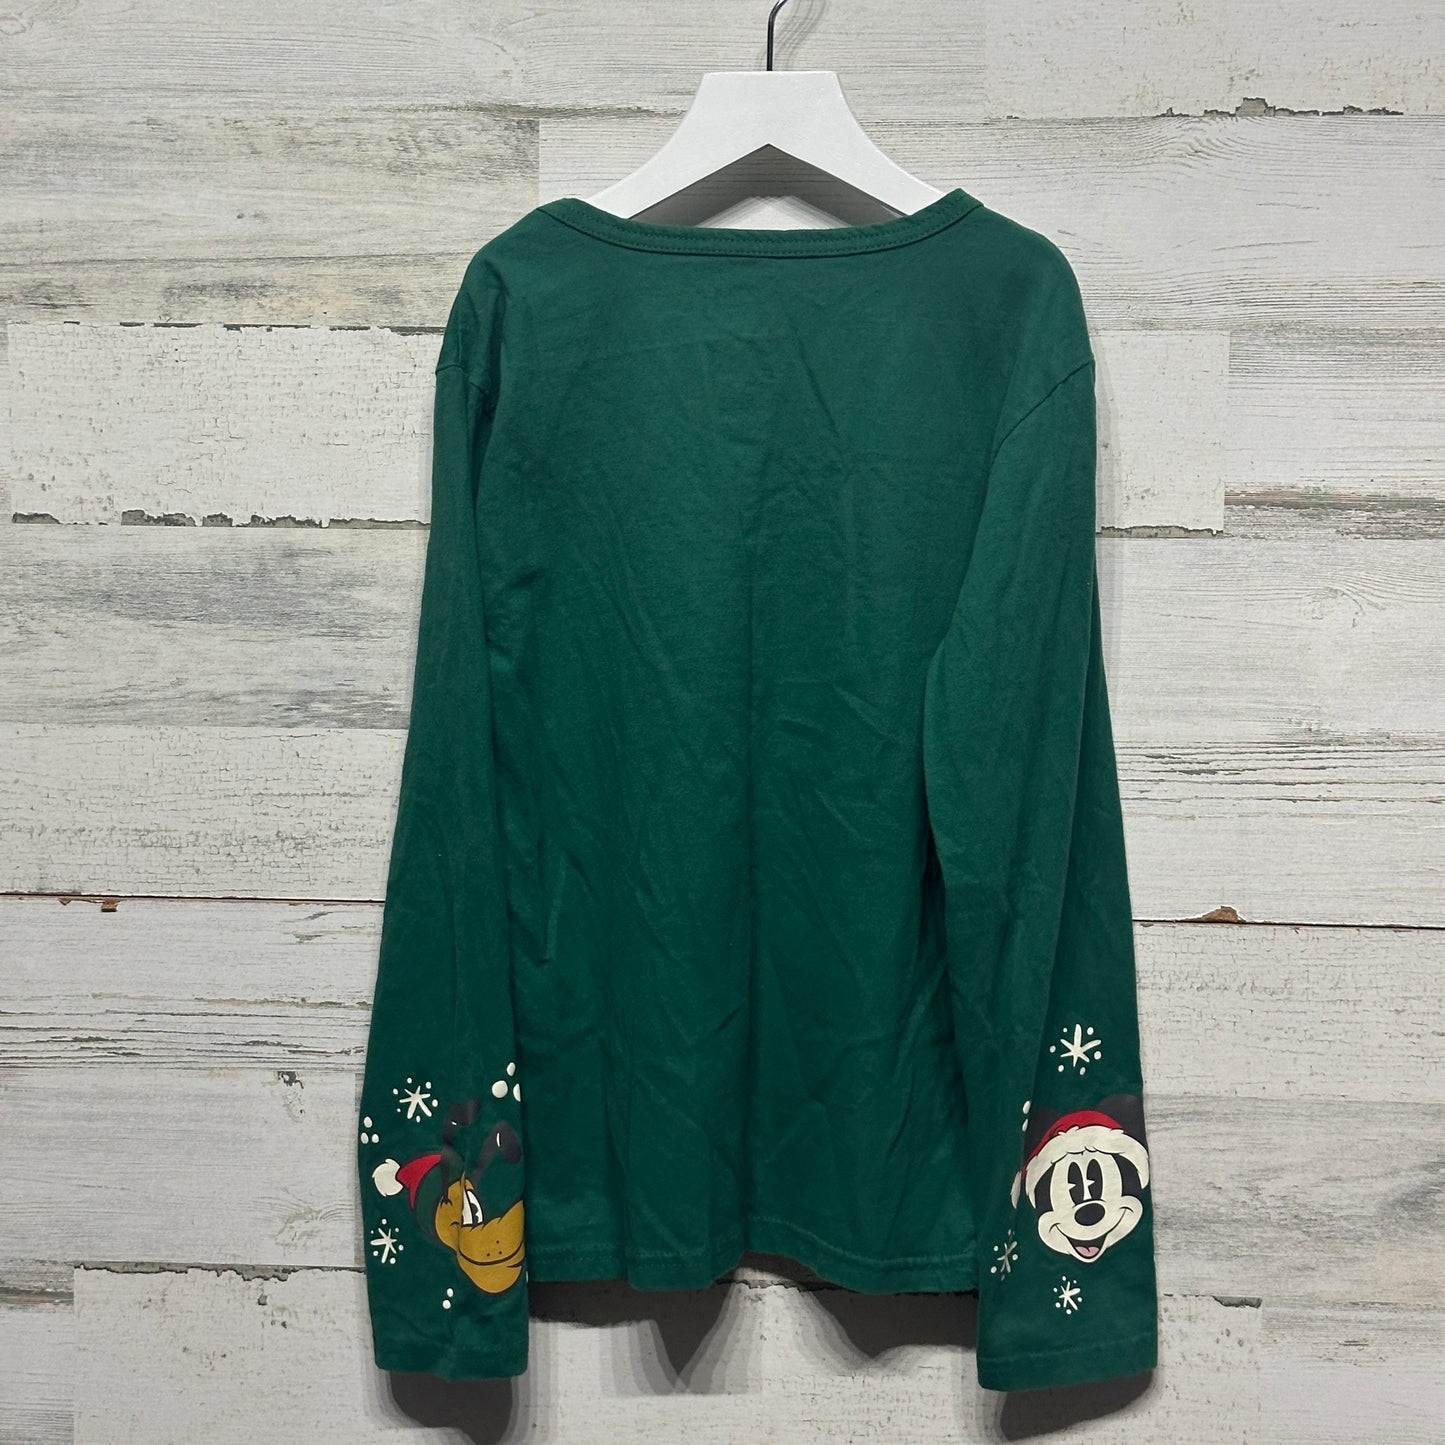 Size Youth Large Disney Holiday Character Long Sleeve Pocket Tee - Very Good Used Condition (Copy)